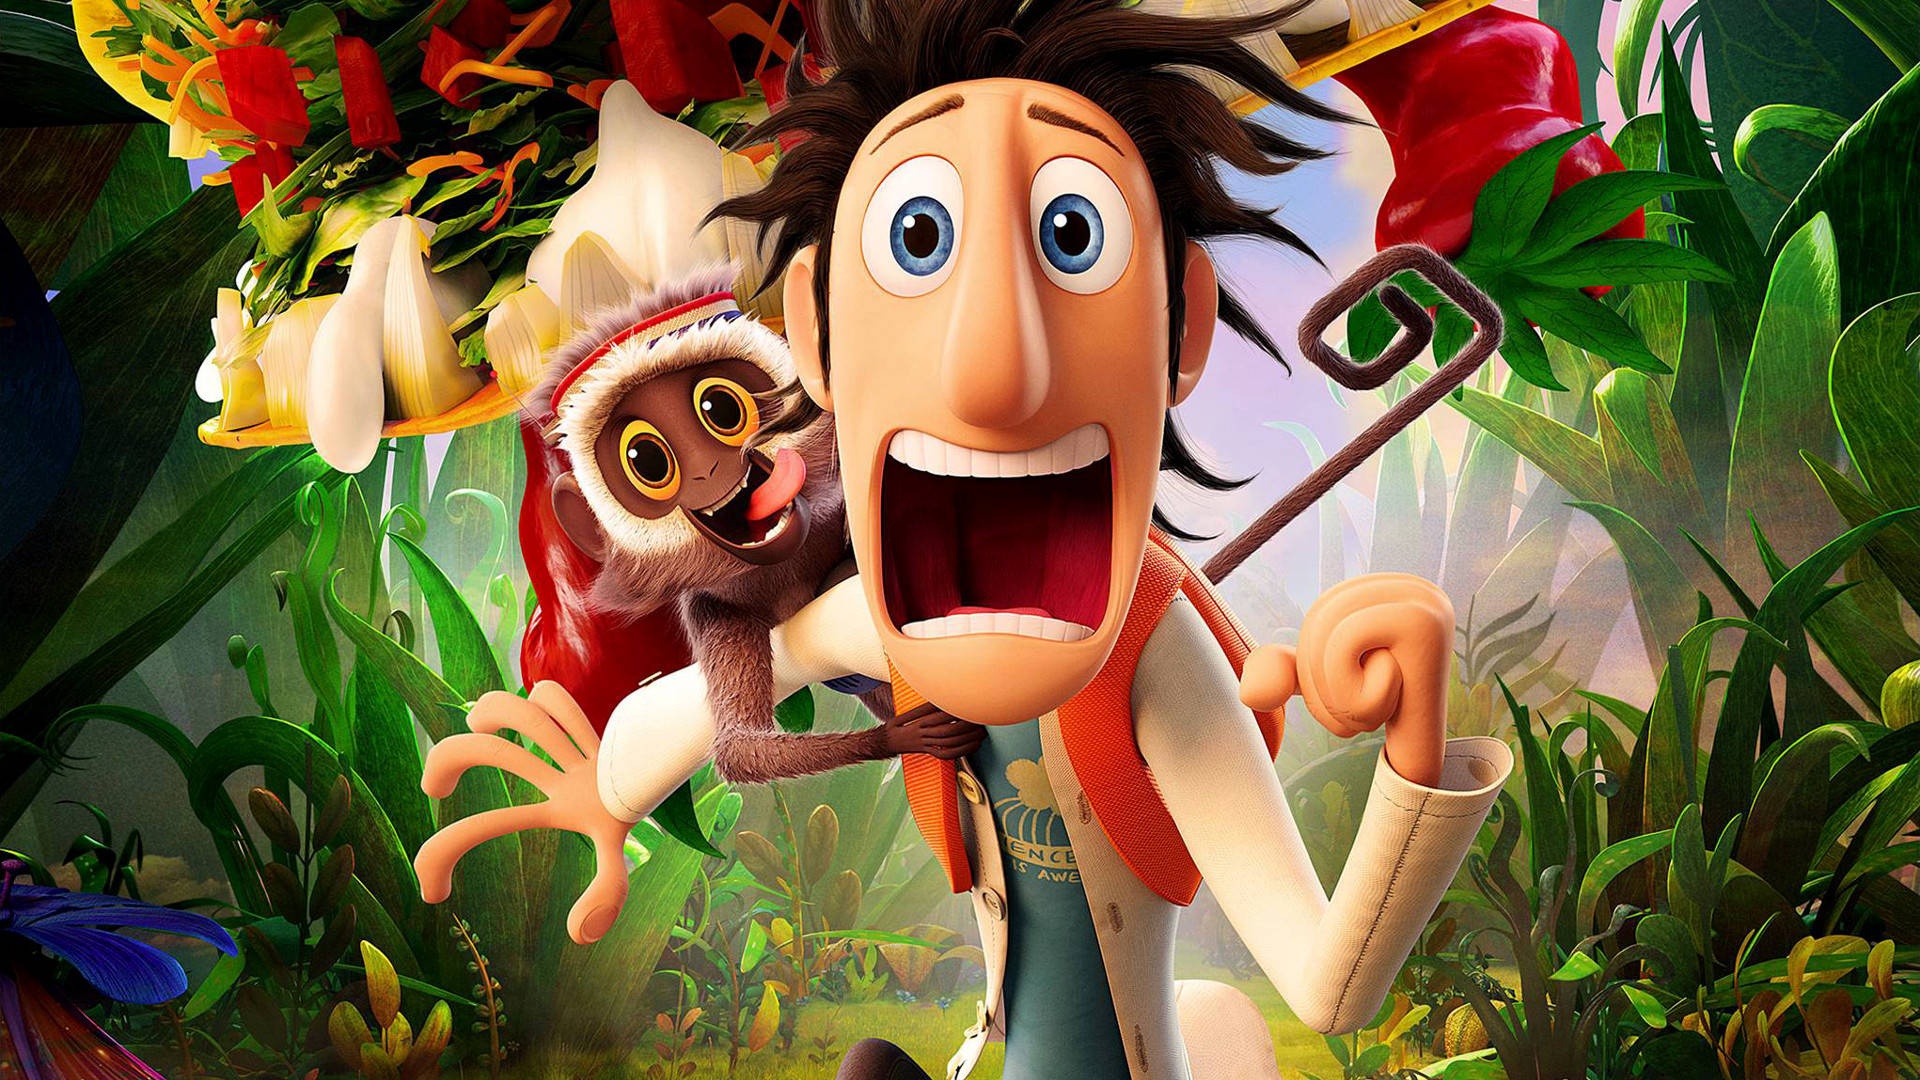 Flint Lockwood and Steve the monkey in Cloudy With A Chance of Meatballs 2. Wallpaper